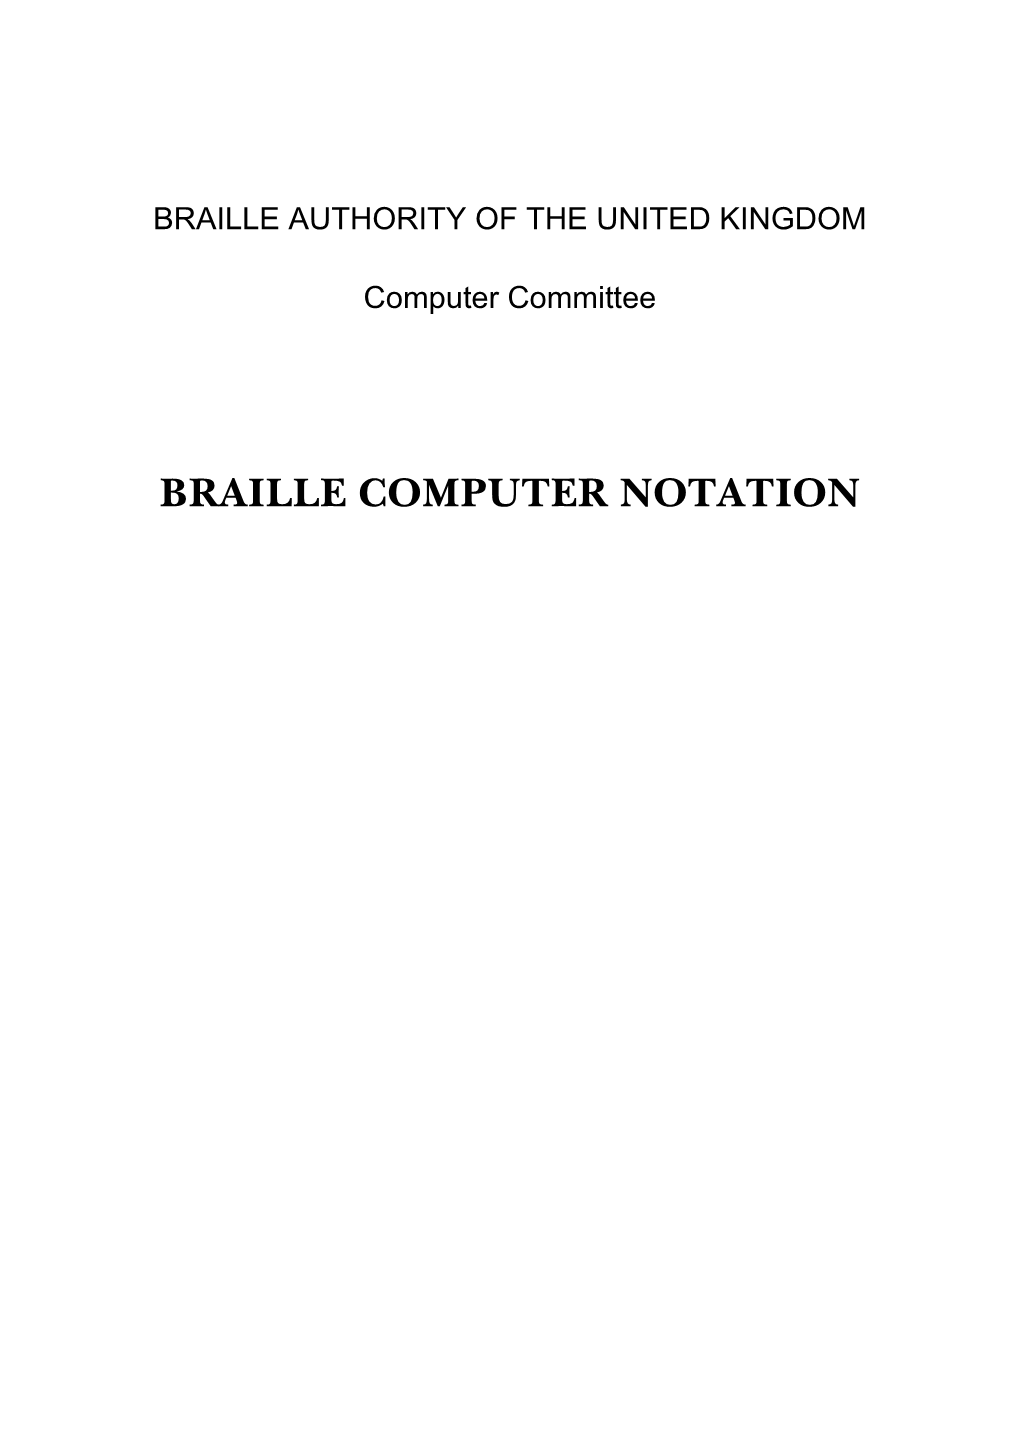 BRAILLE COMPUTER NOTATION © Braille Authority of the United Kingdom 1996, 2006 Registered Charity No